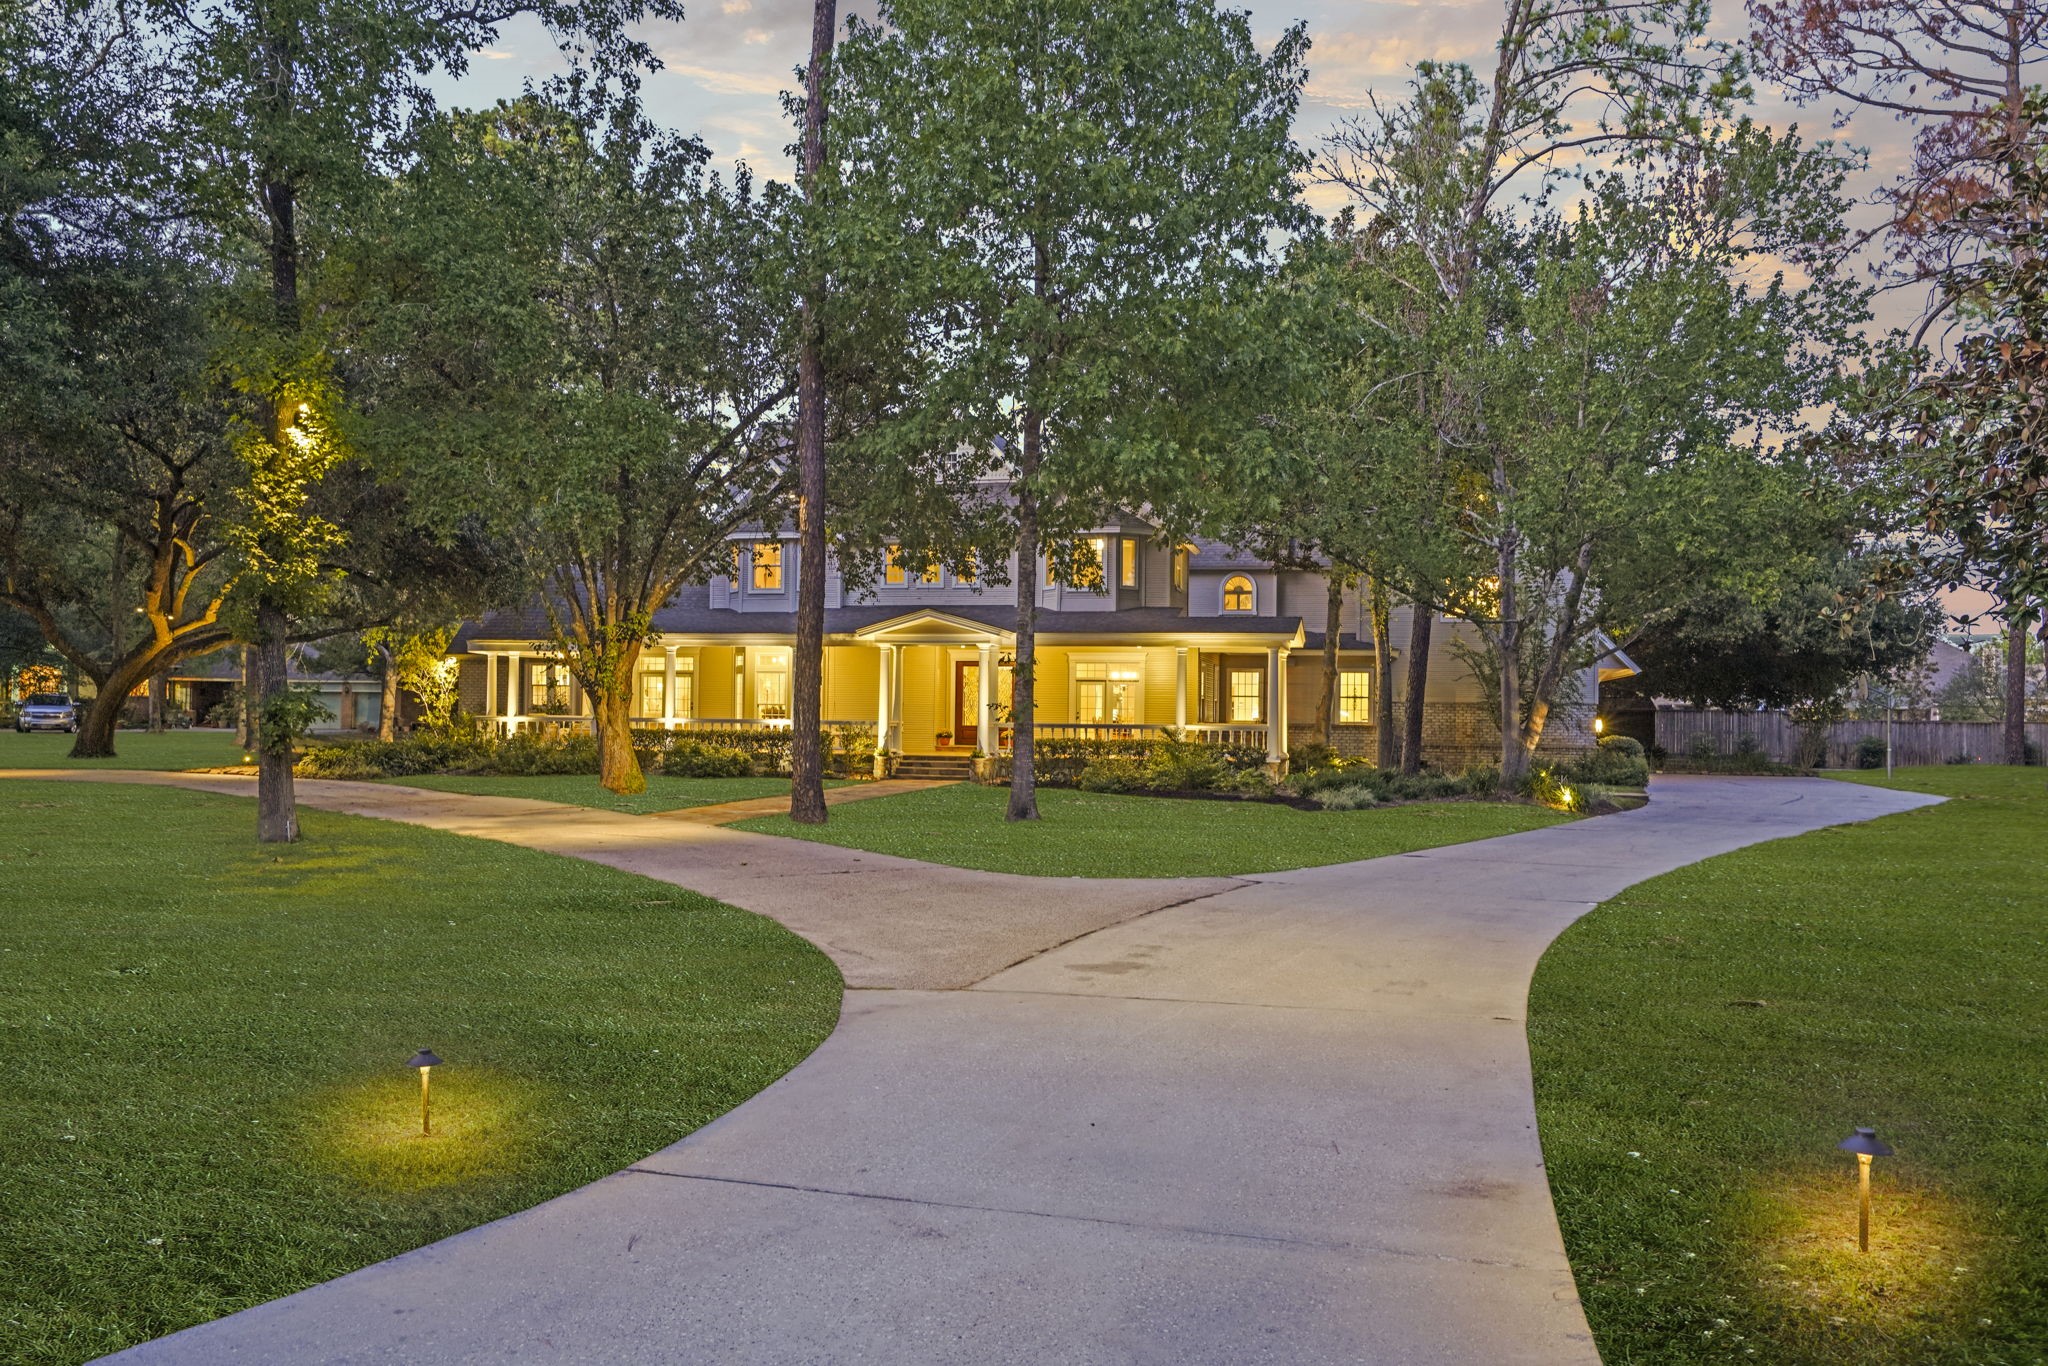 Circle driveway for all of your guests and easy access to the home.